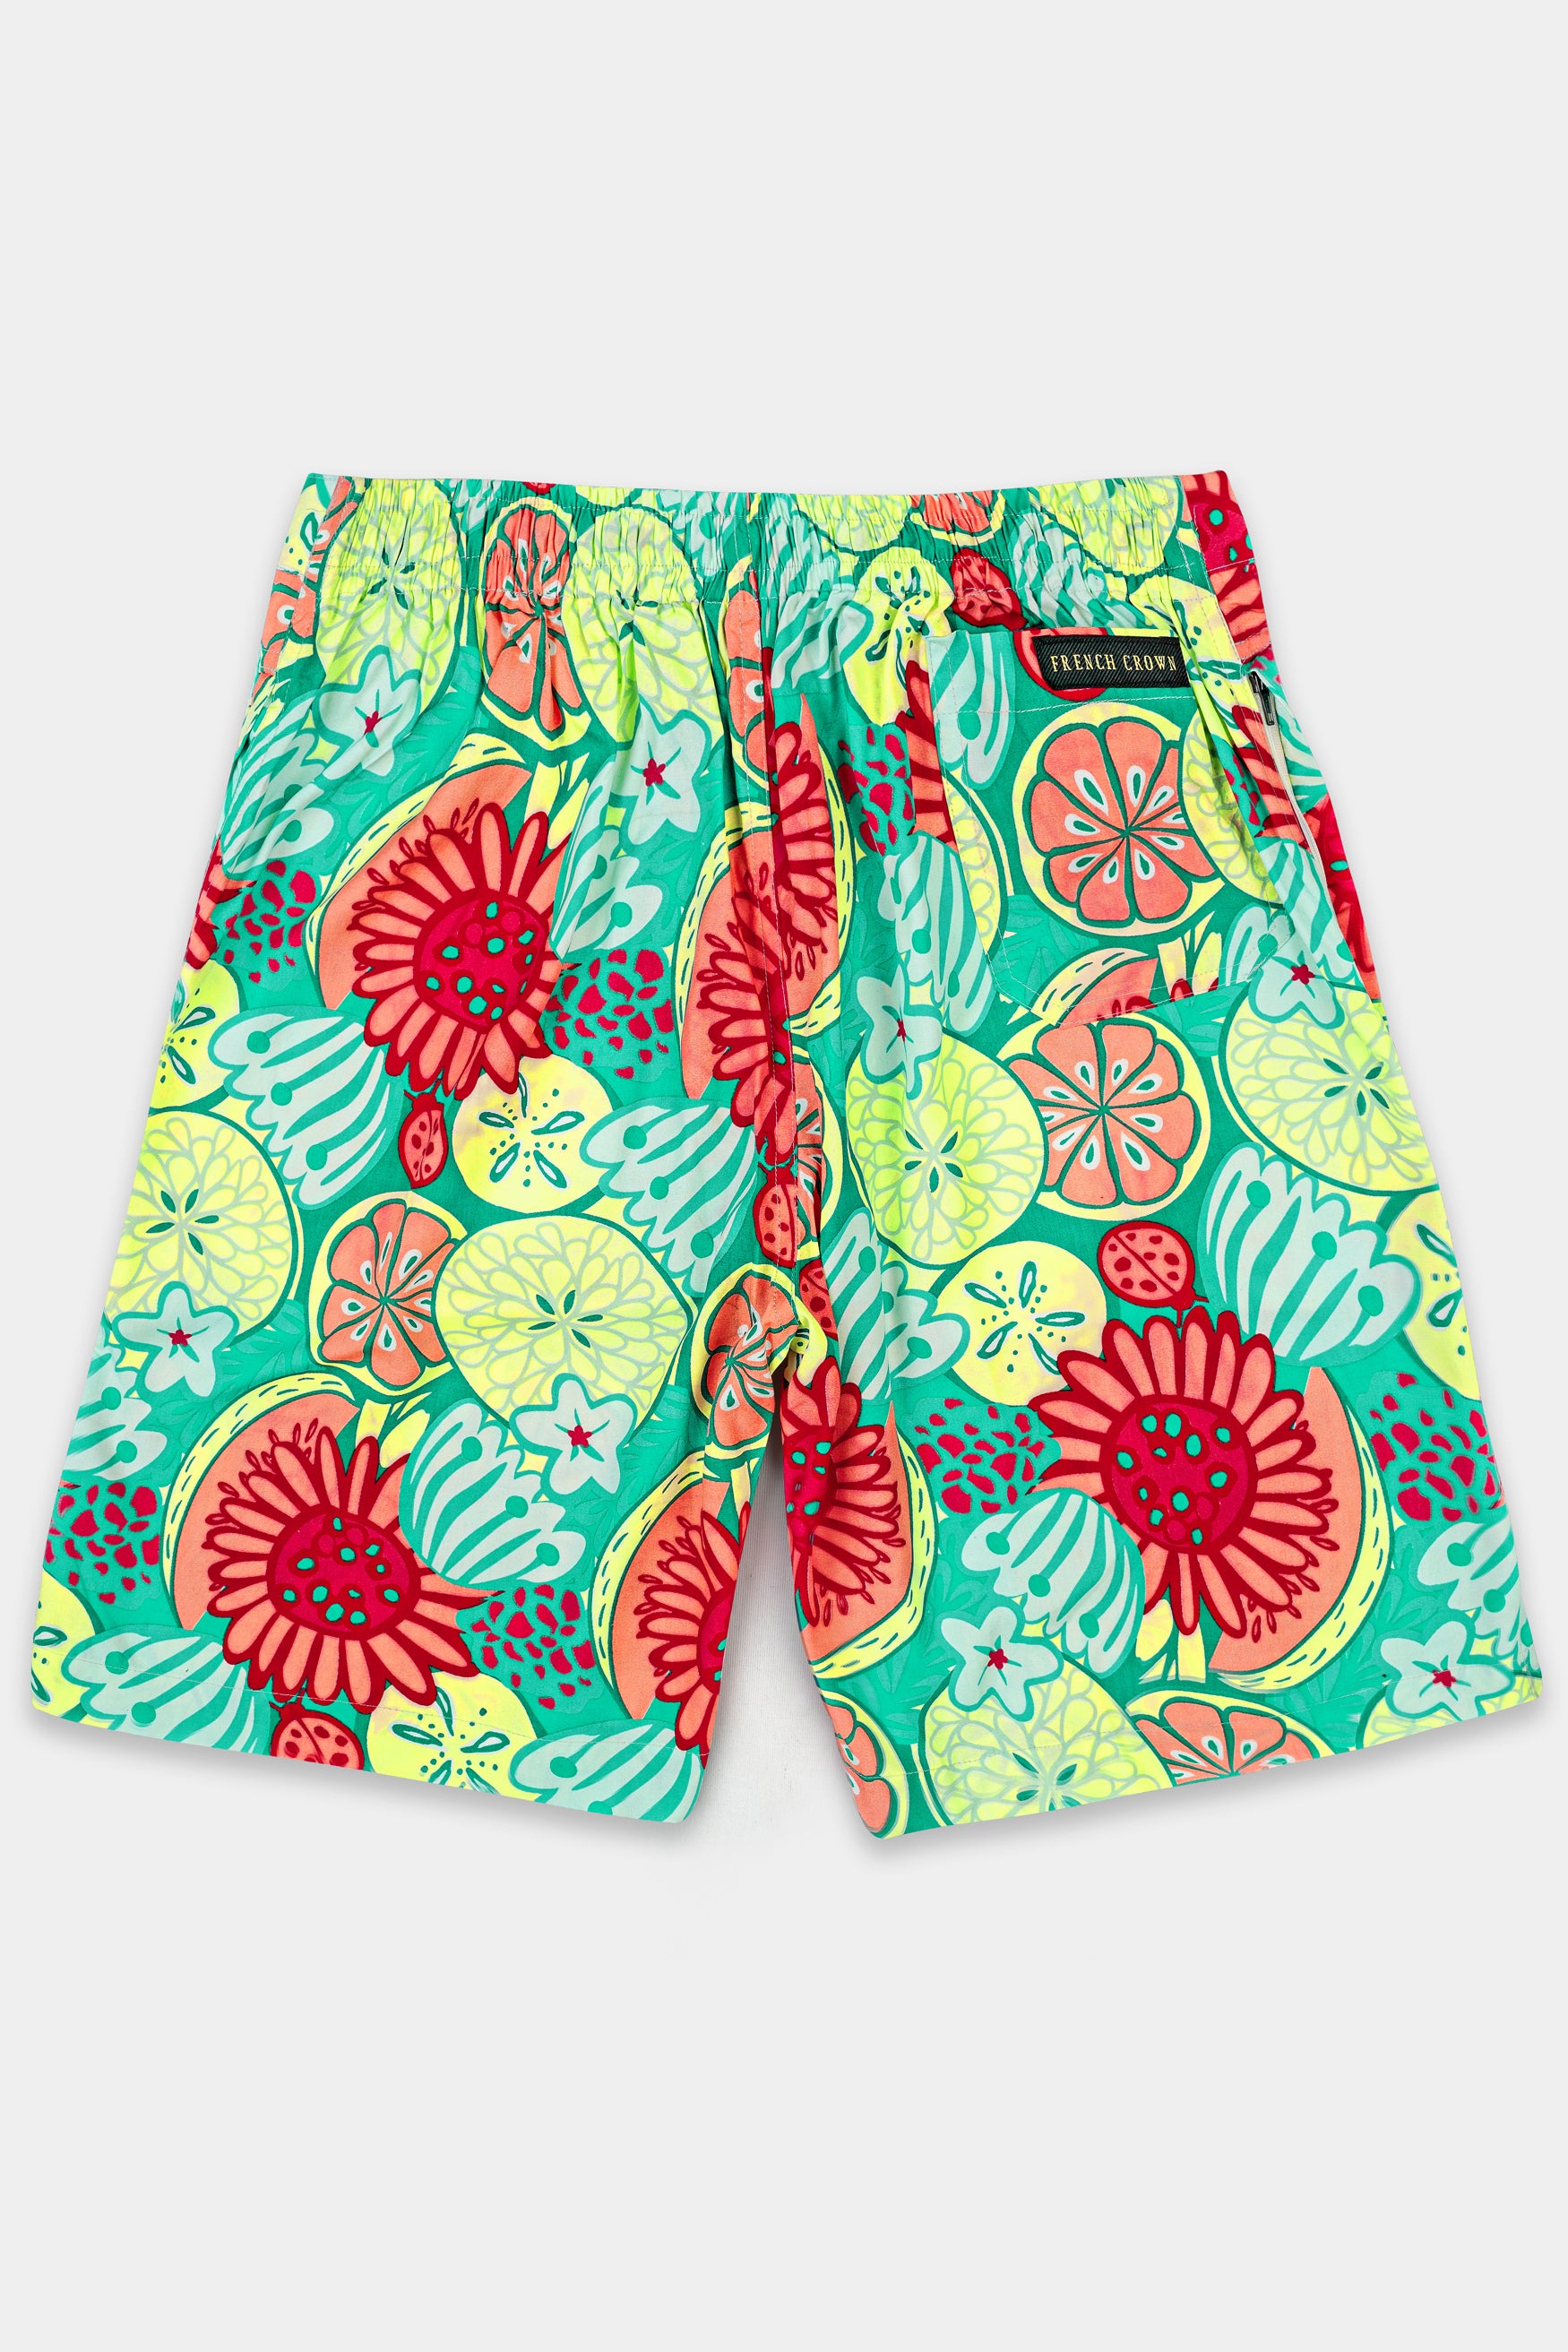 Caribbean Green with Scarlet Red Floral Printed Premium Cotton Shorts SR349-28,  SR349-30,  SR349-32,  SR349-34,  SR349-36,  SR349-38,  SR349-40,  SR349-42,  SR349-44